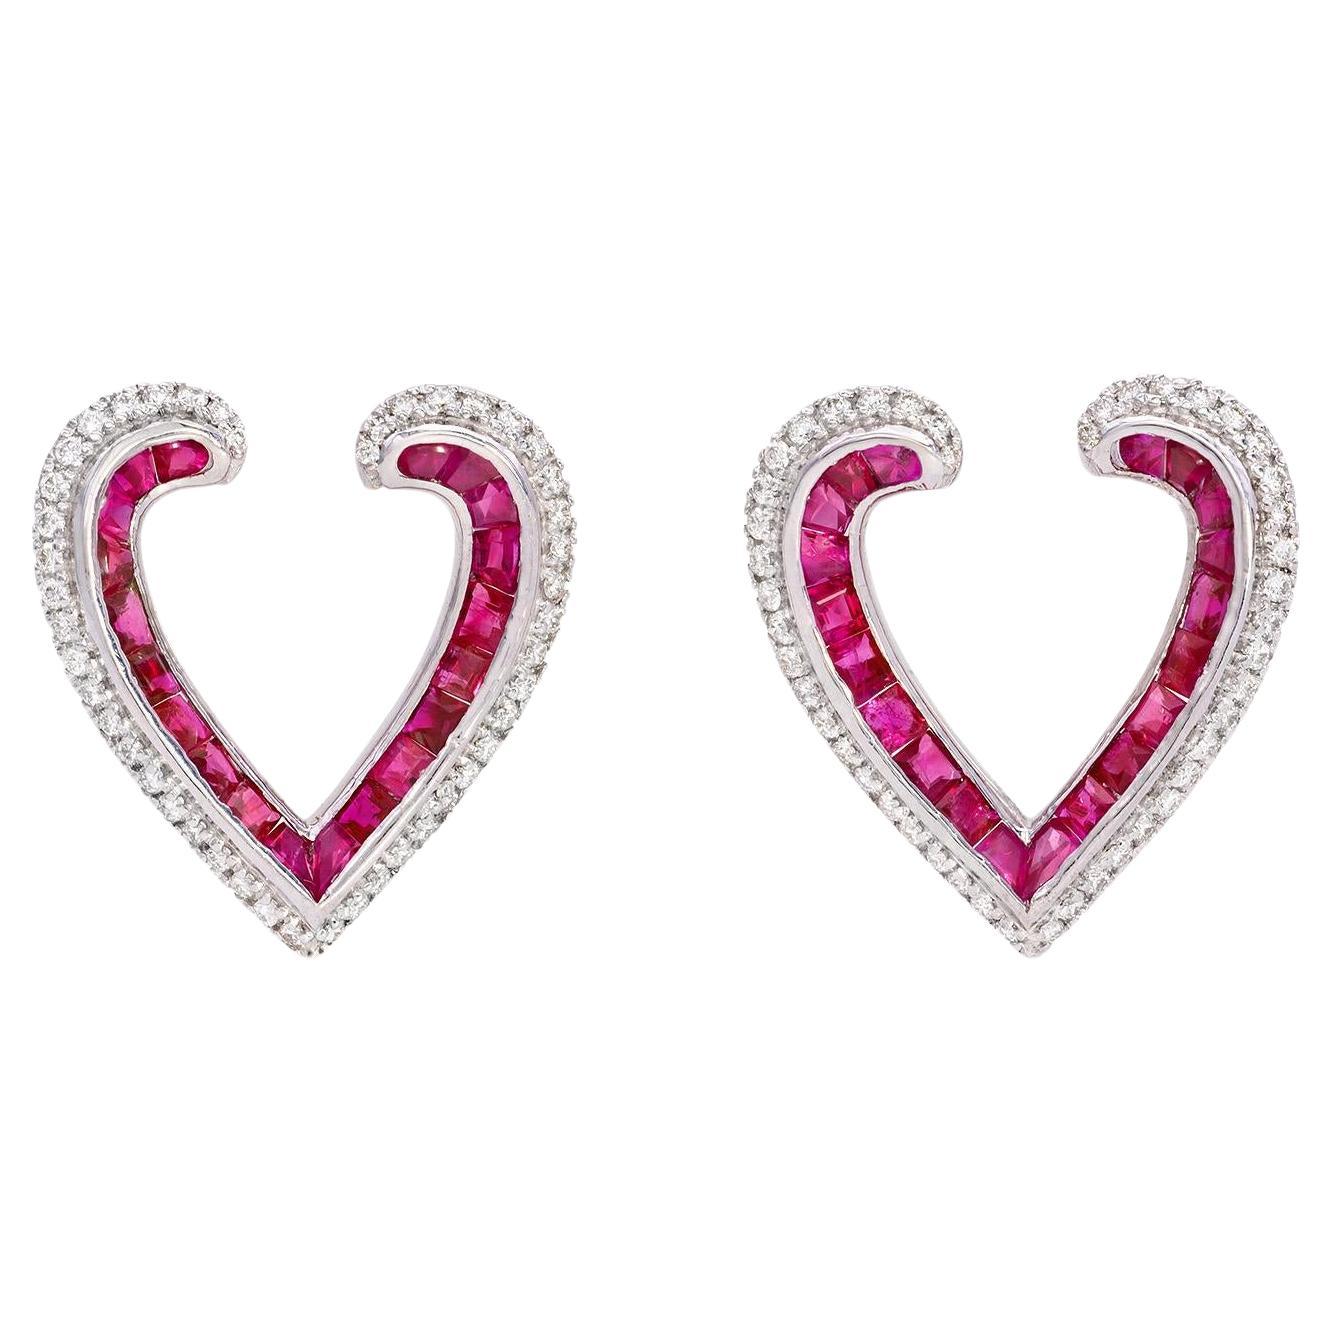 1.4 Carat Ruby and 0.71 Carat Diamond Heart Shaped Studs For Sale